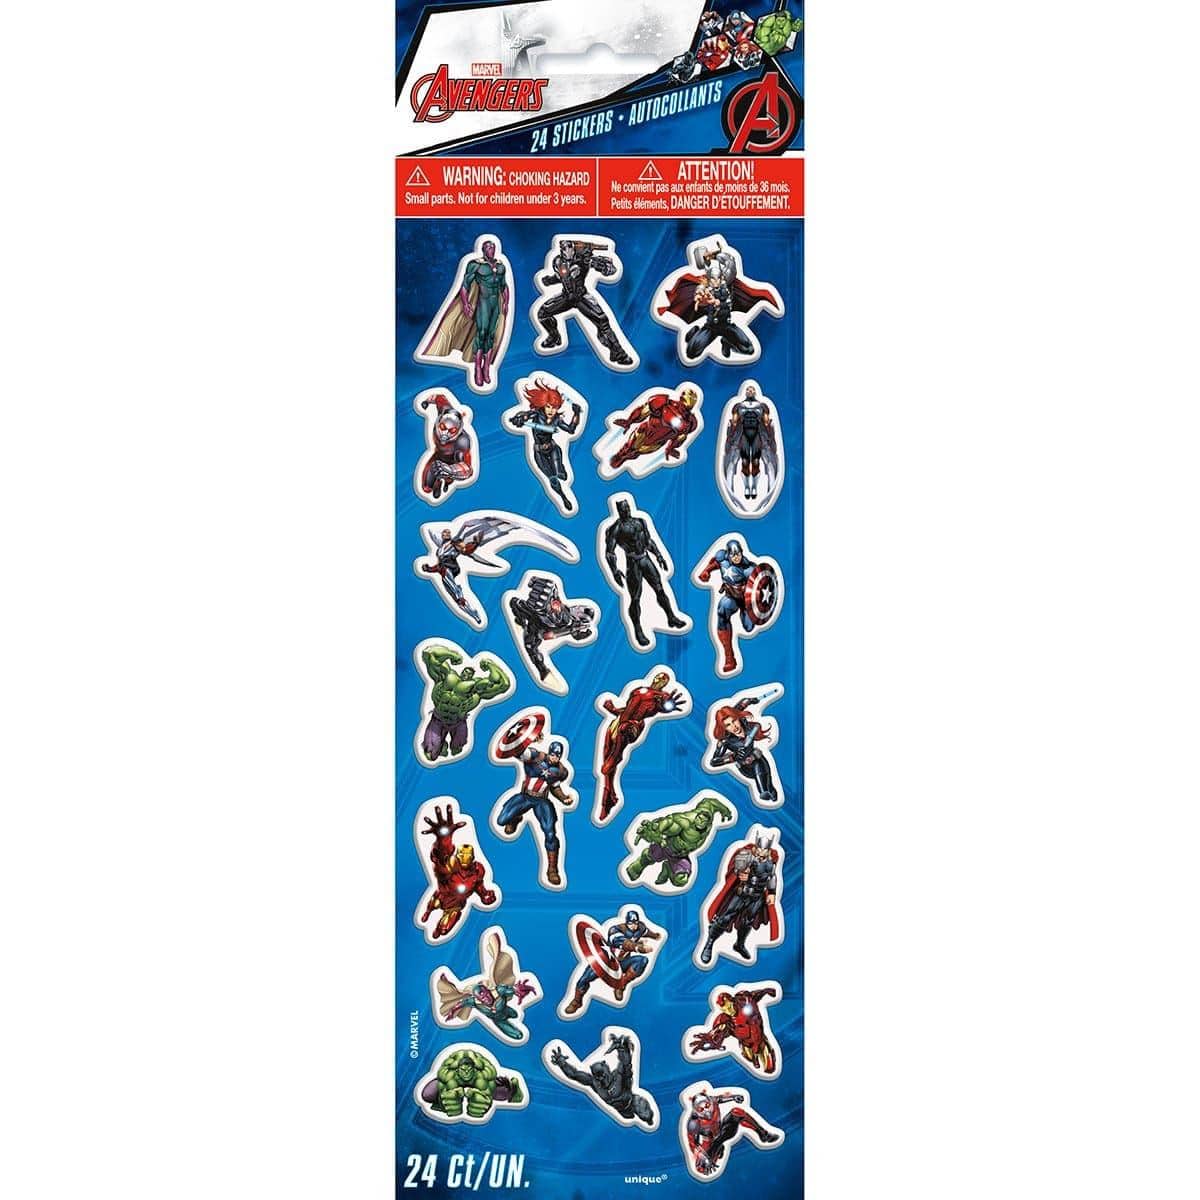 Buy Kids Birthday Avengers Assemble puffy stickers, 24 per package sold at Party Expert